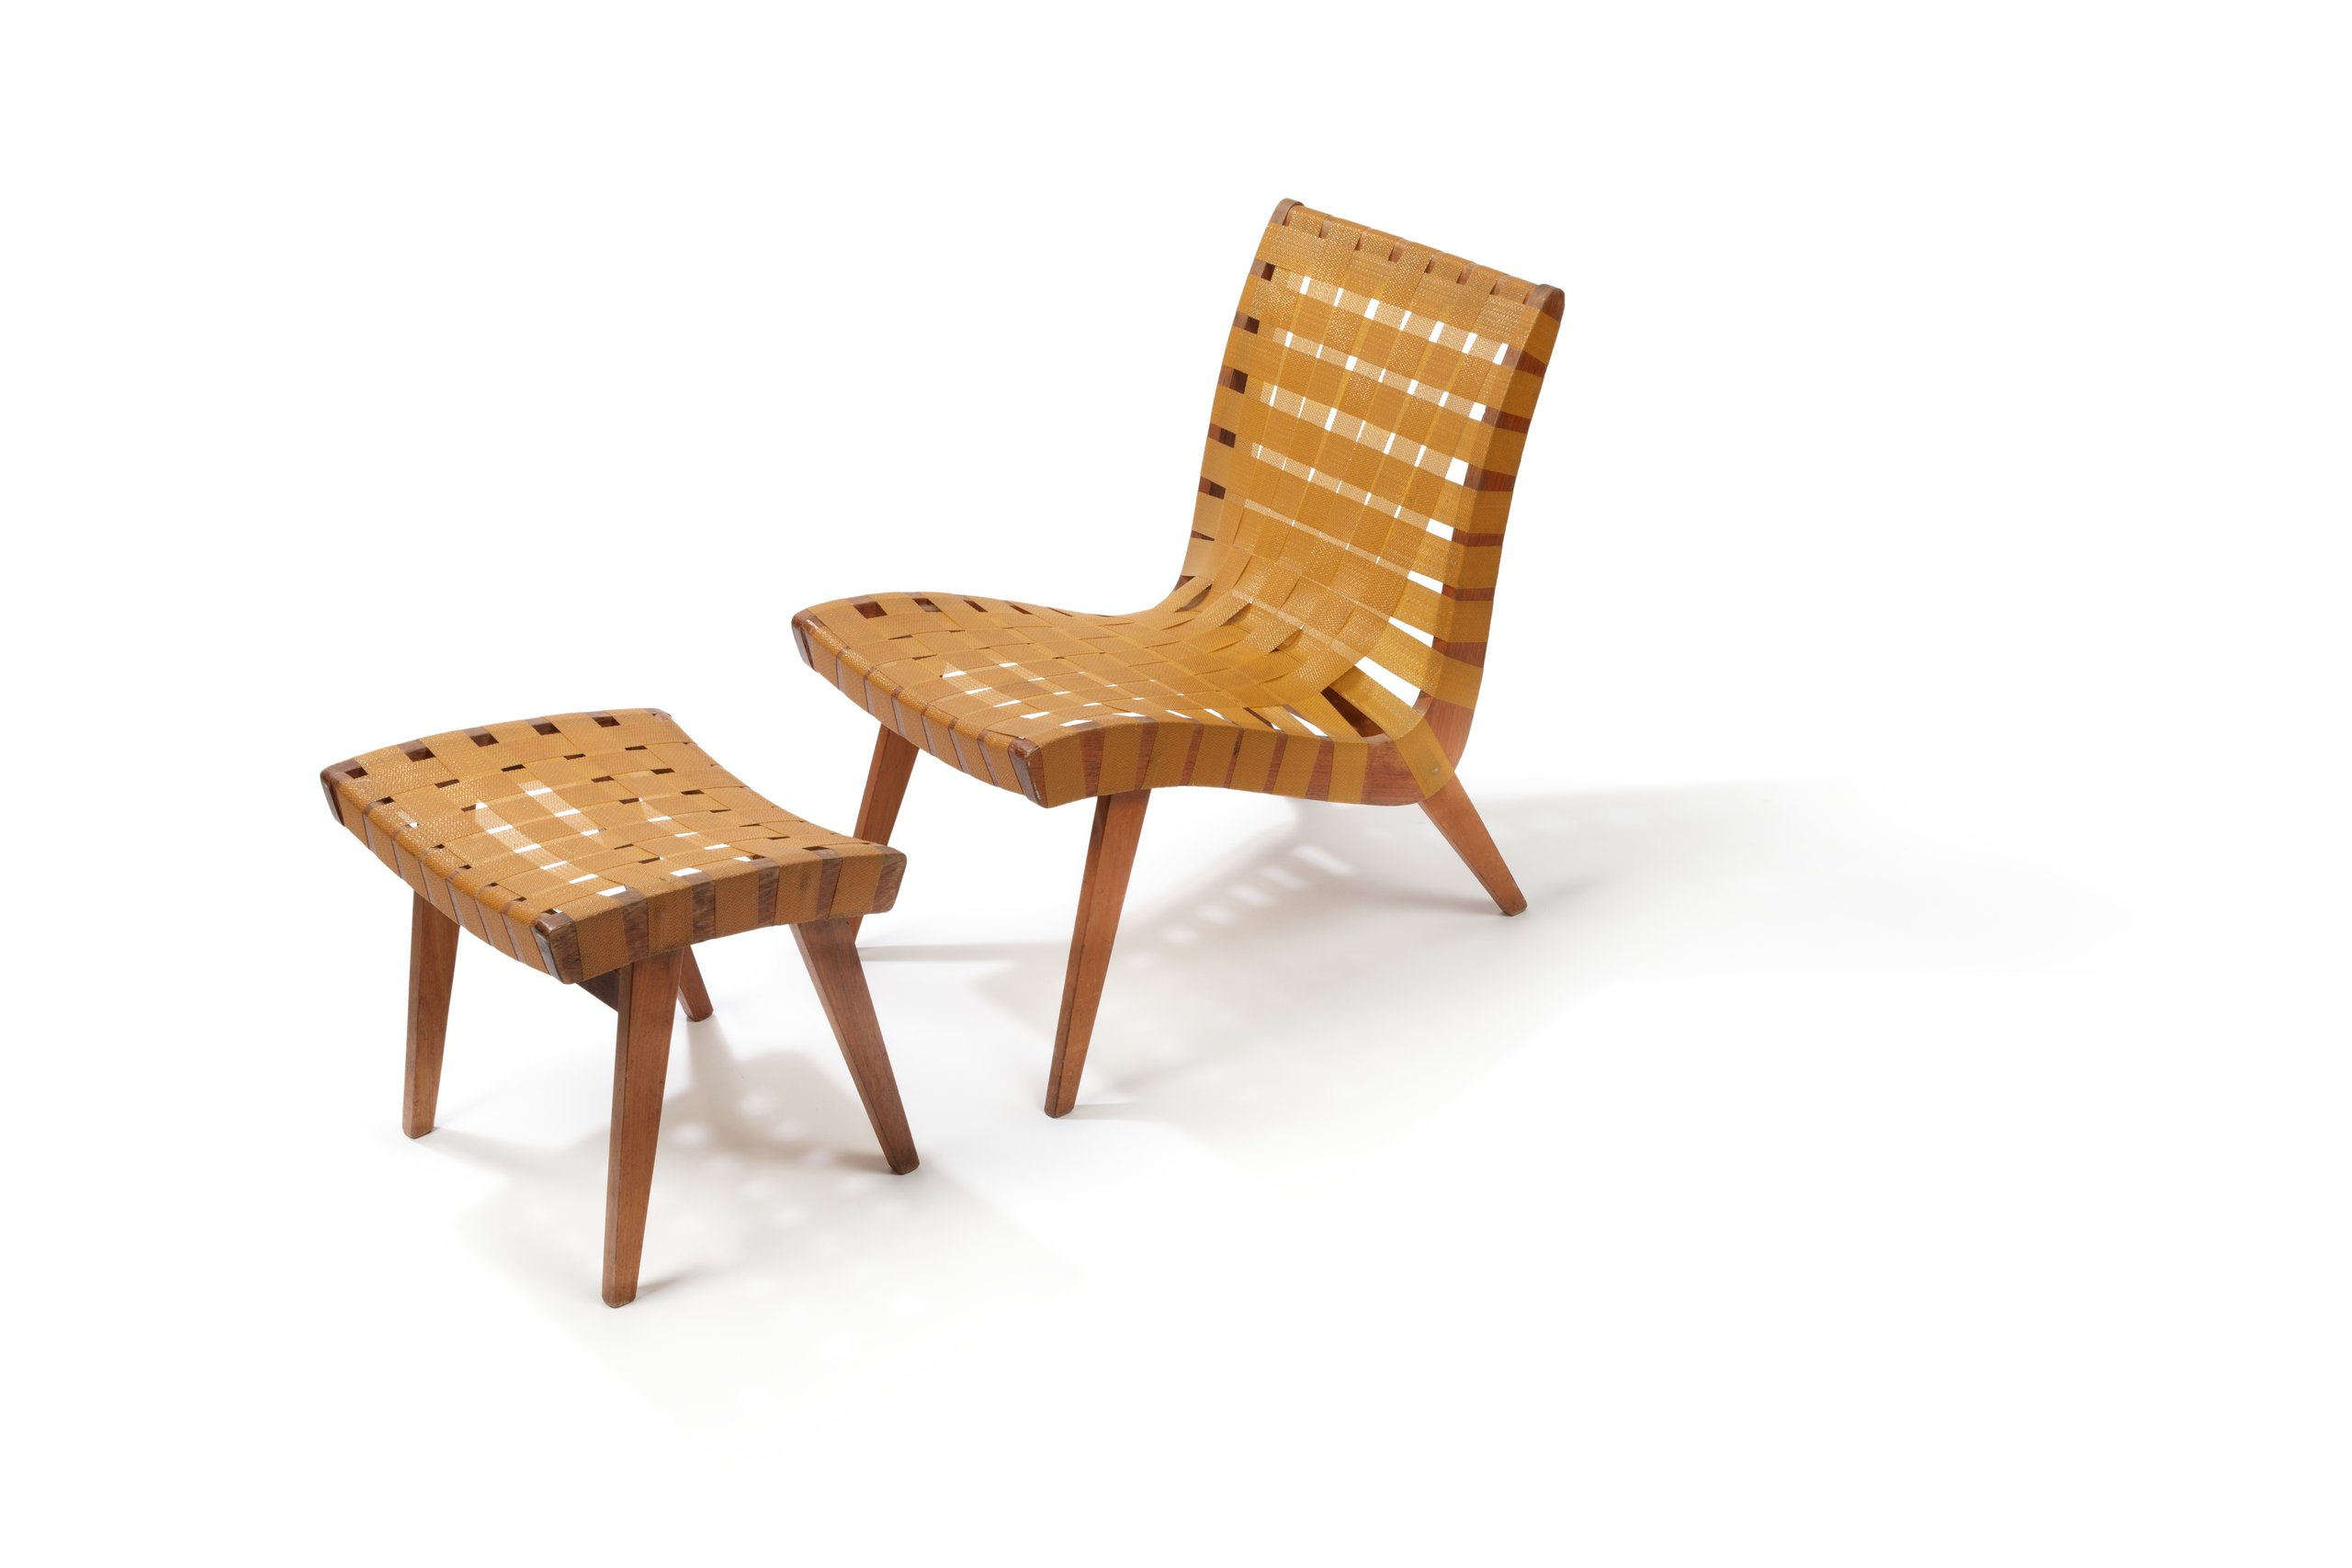 Chair and stool by Douglas Snelling